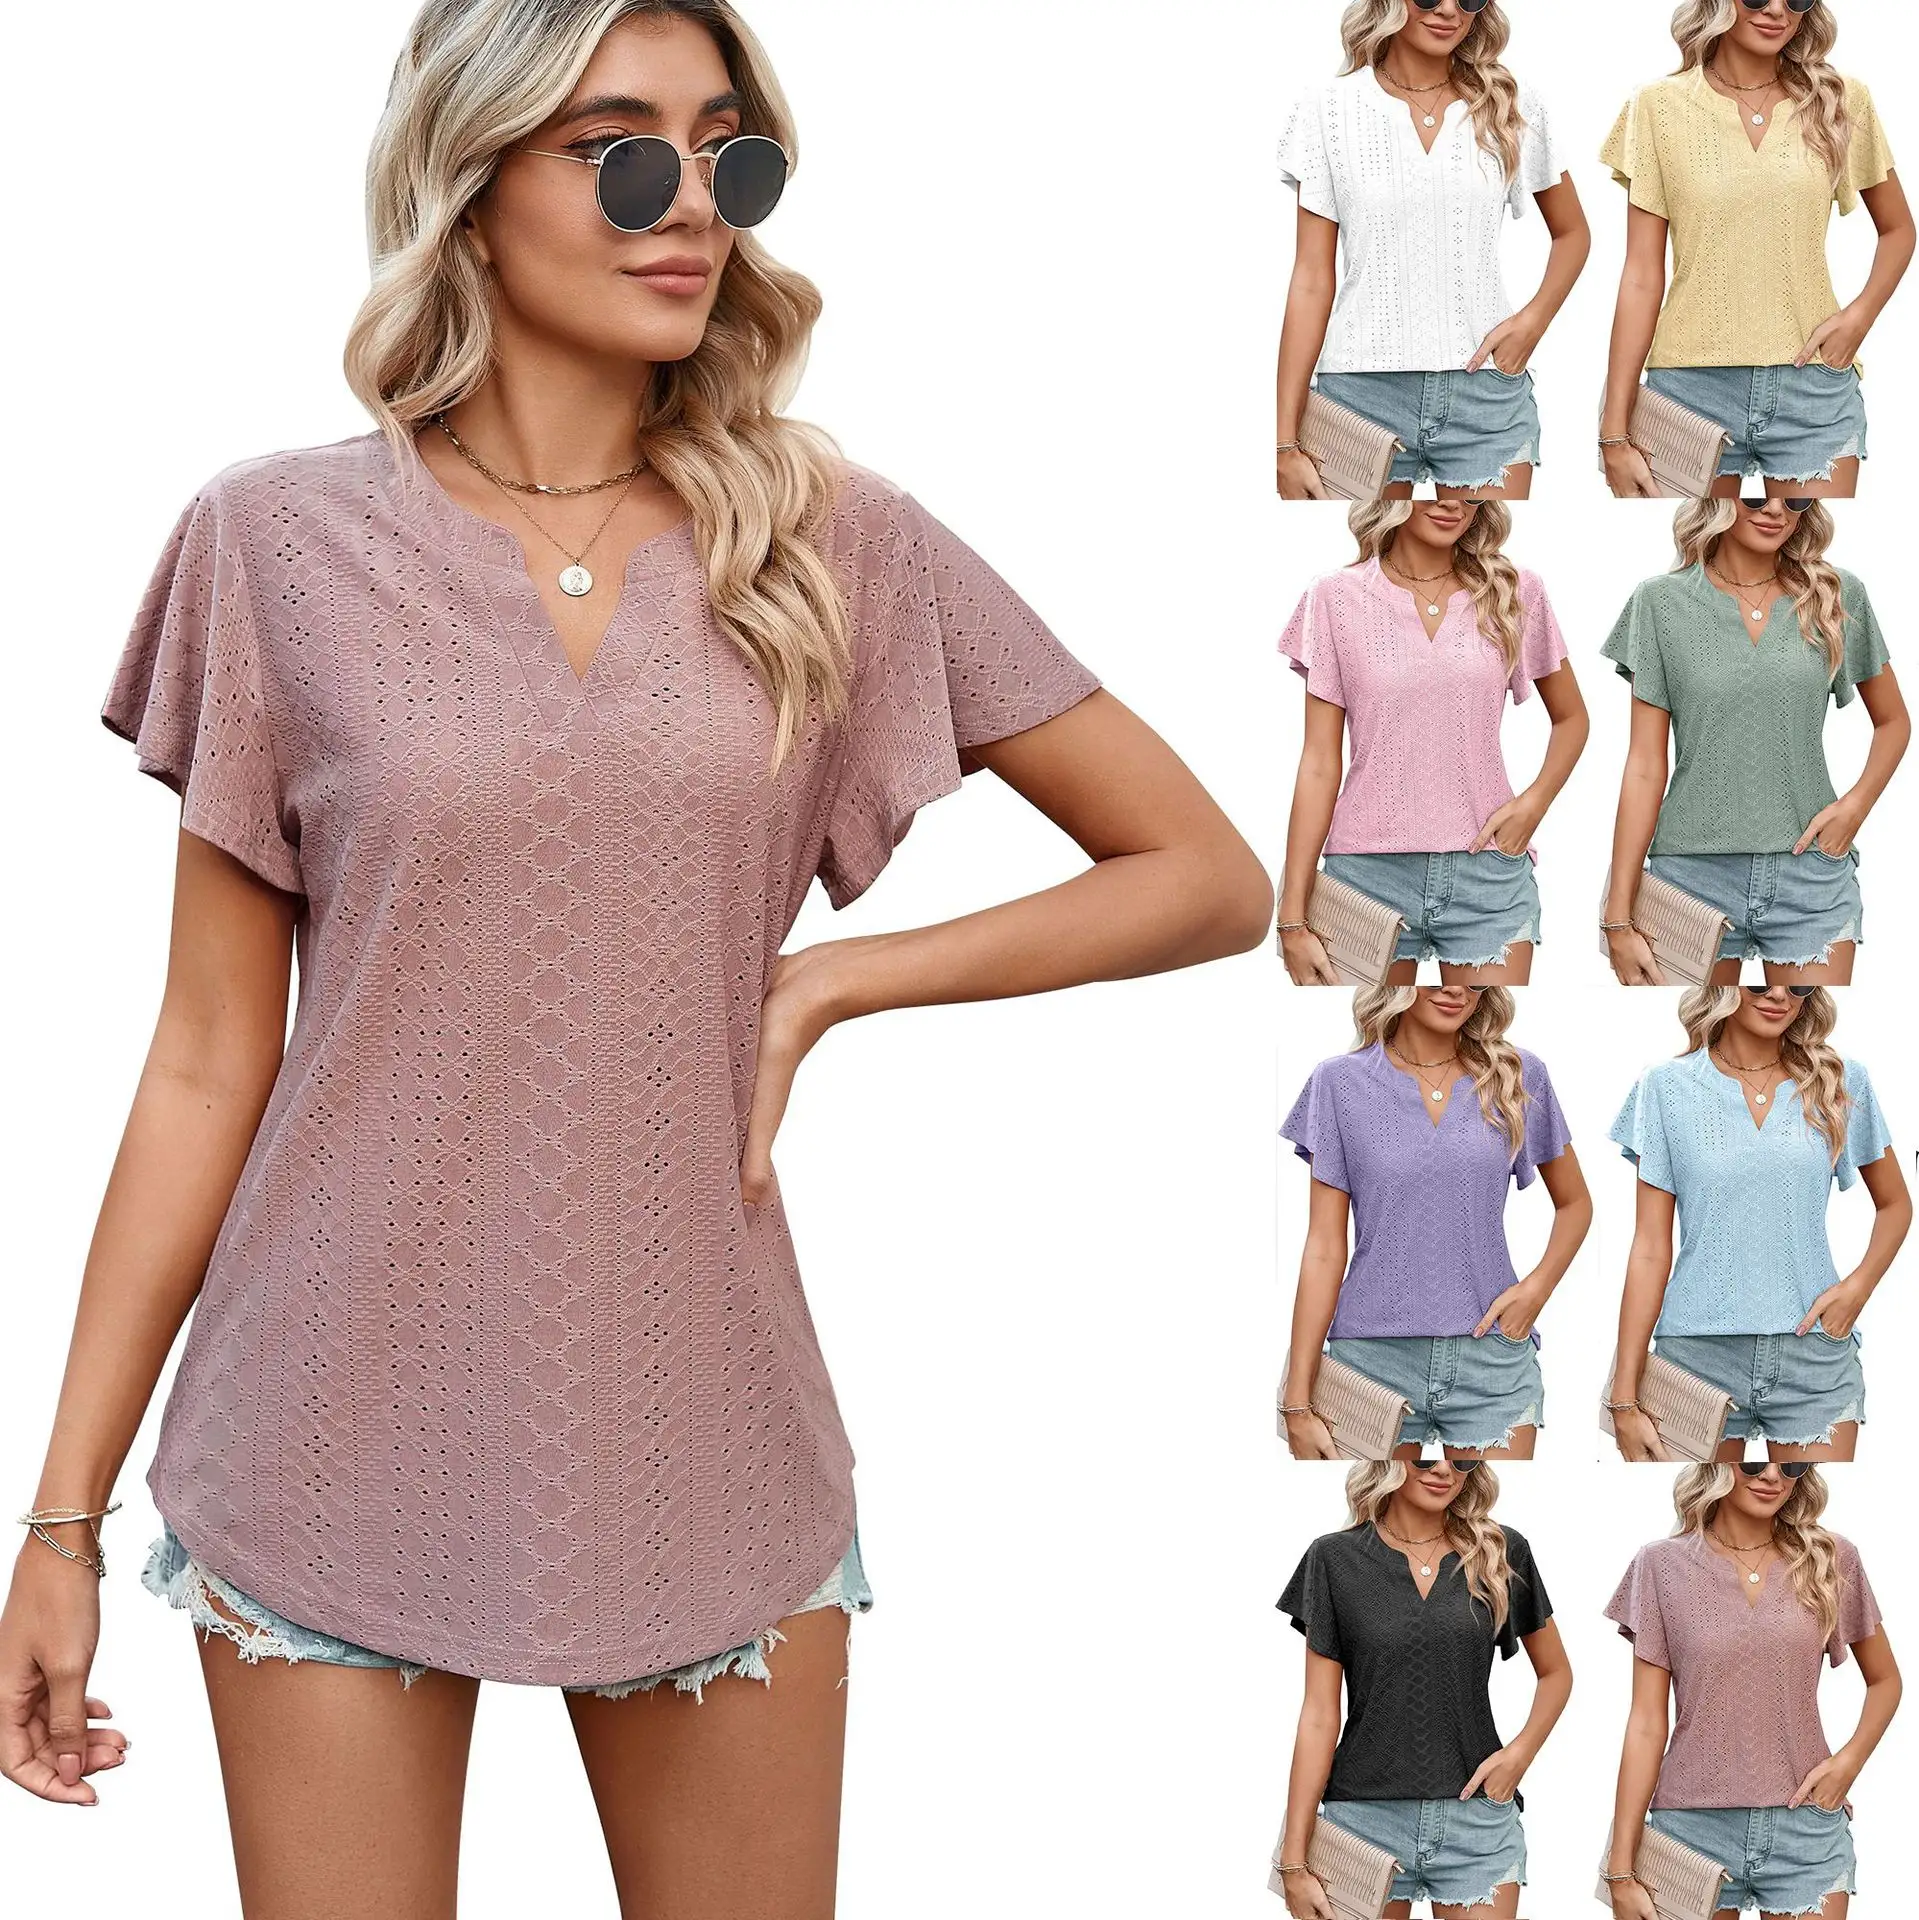 Women's Blouse Sale Ladies Lovely Lace Short Sleeve Casual T-Shirt V-Neck Solid Color Top Comfortable for Spring Summer